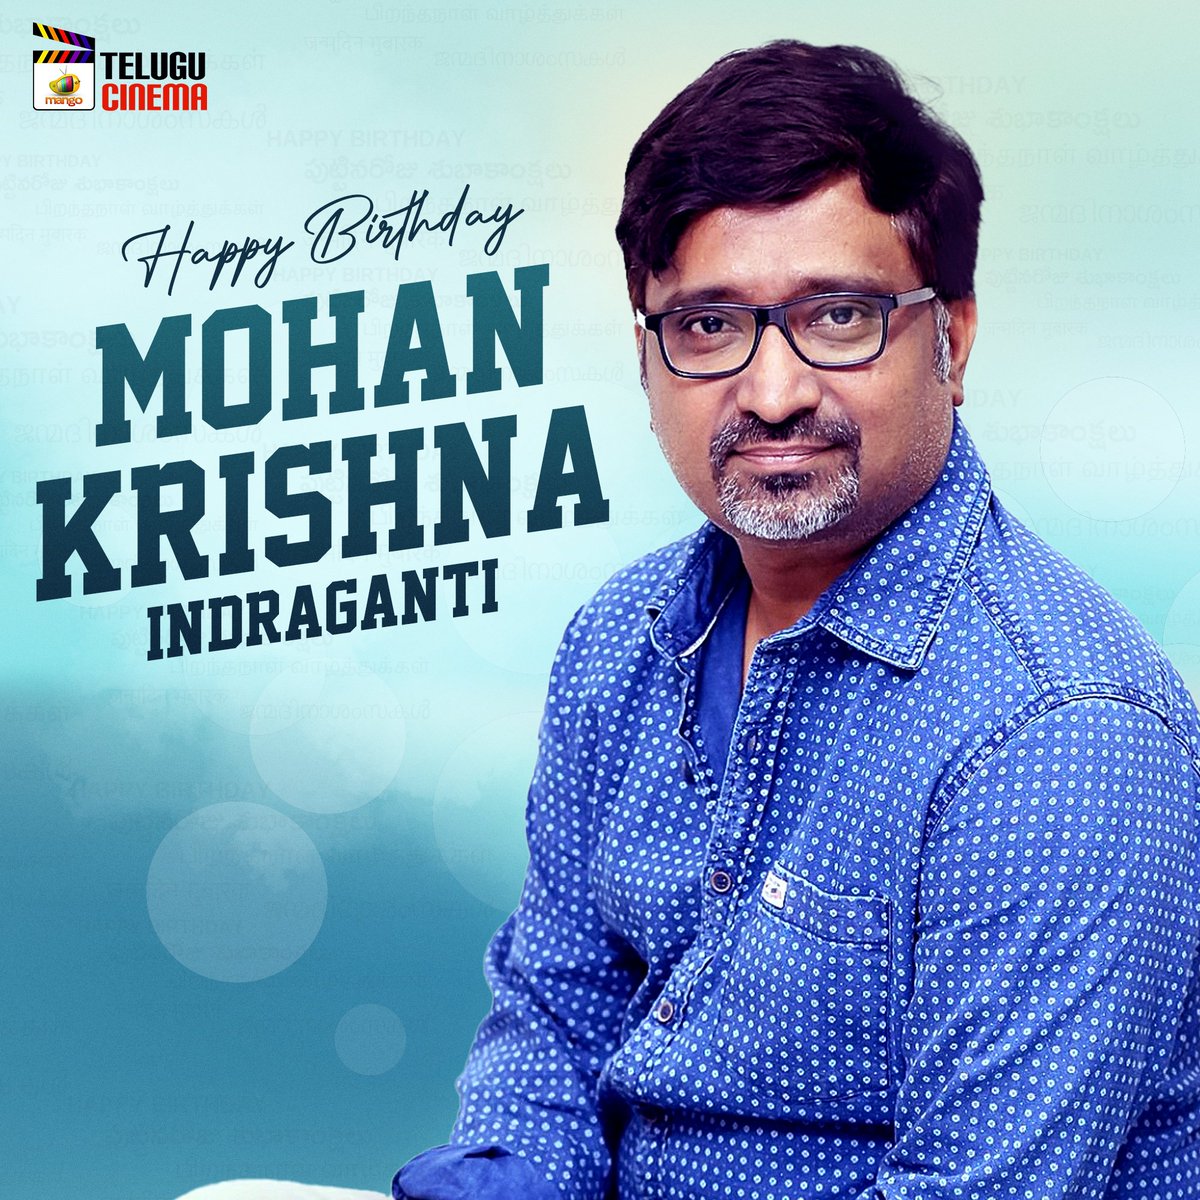 Here's wishing the Creative Director #MohanKrishnaIndraganti Garu a very Happy Birthday 🎂 🎉🎊

Wishing you all success for your upcoming projects 💫

#HappyBirthdayMohanKrishnaIndraganti #HBDMohanKrishnaIndraganti #Tollywood #MangoTeluguCinema